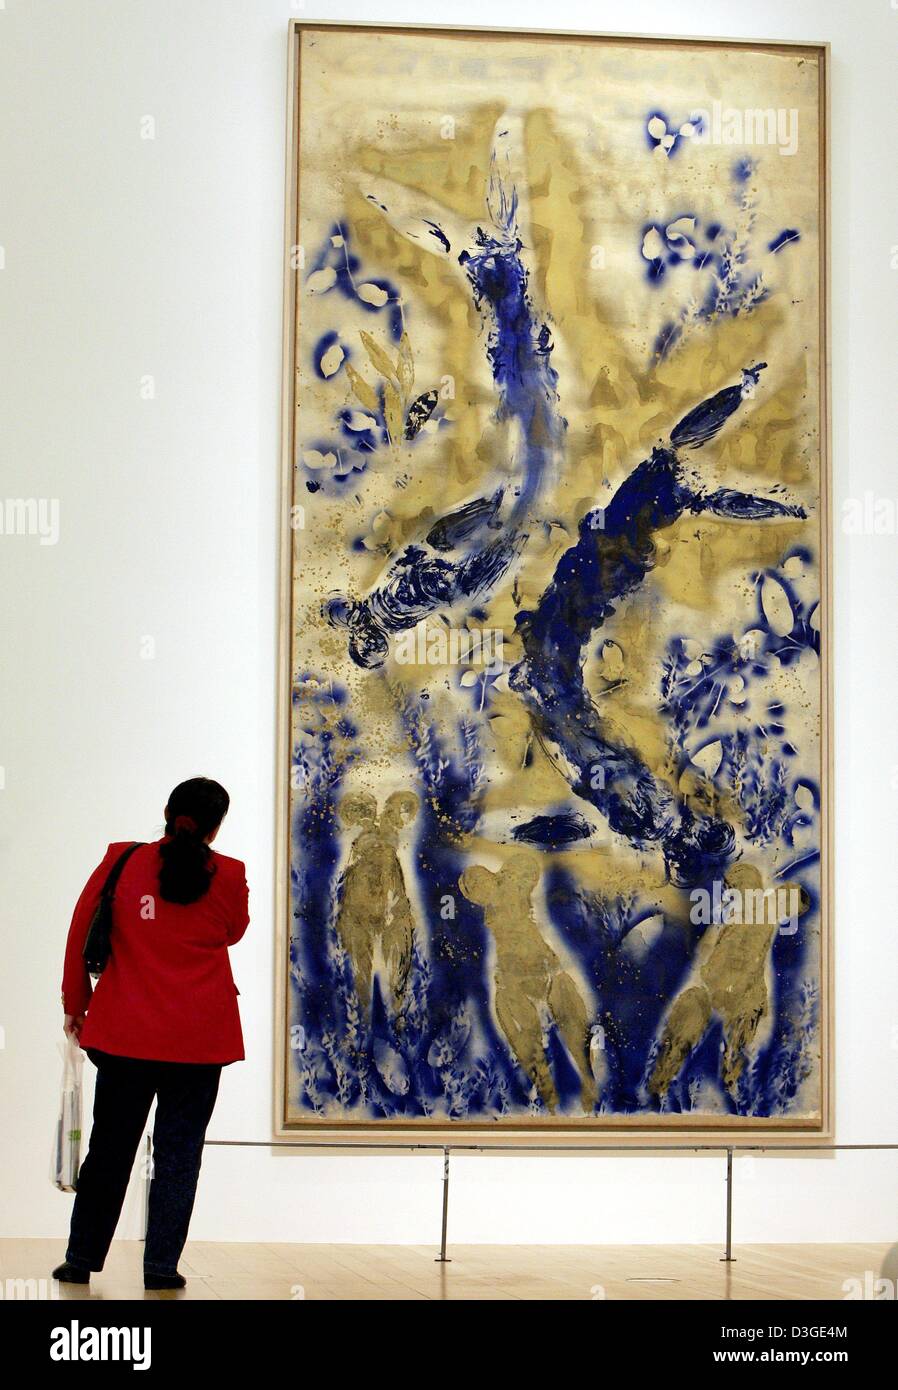 dpa) - A visitor looks at the painting 'anthropometry' by Yves Klein at the  Schirn art hall in Frankfurt, Germany, 16 September 2004. The exhibition  featuring works by the famous French artist